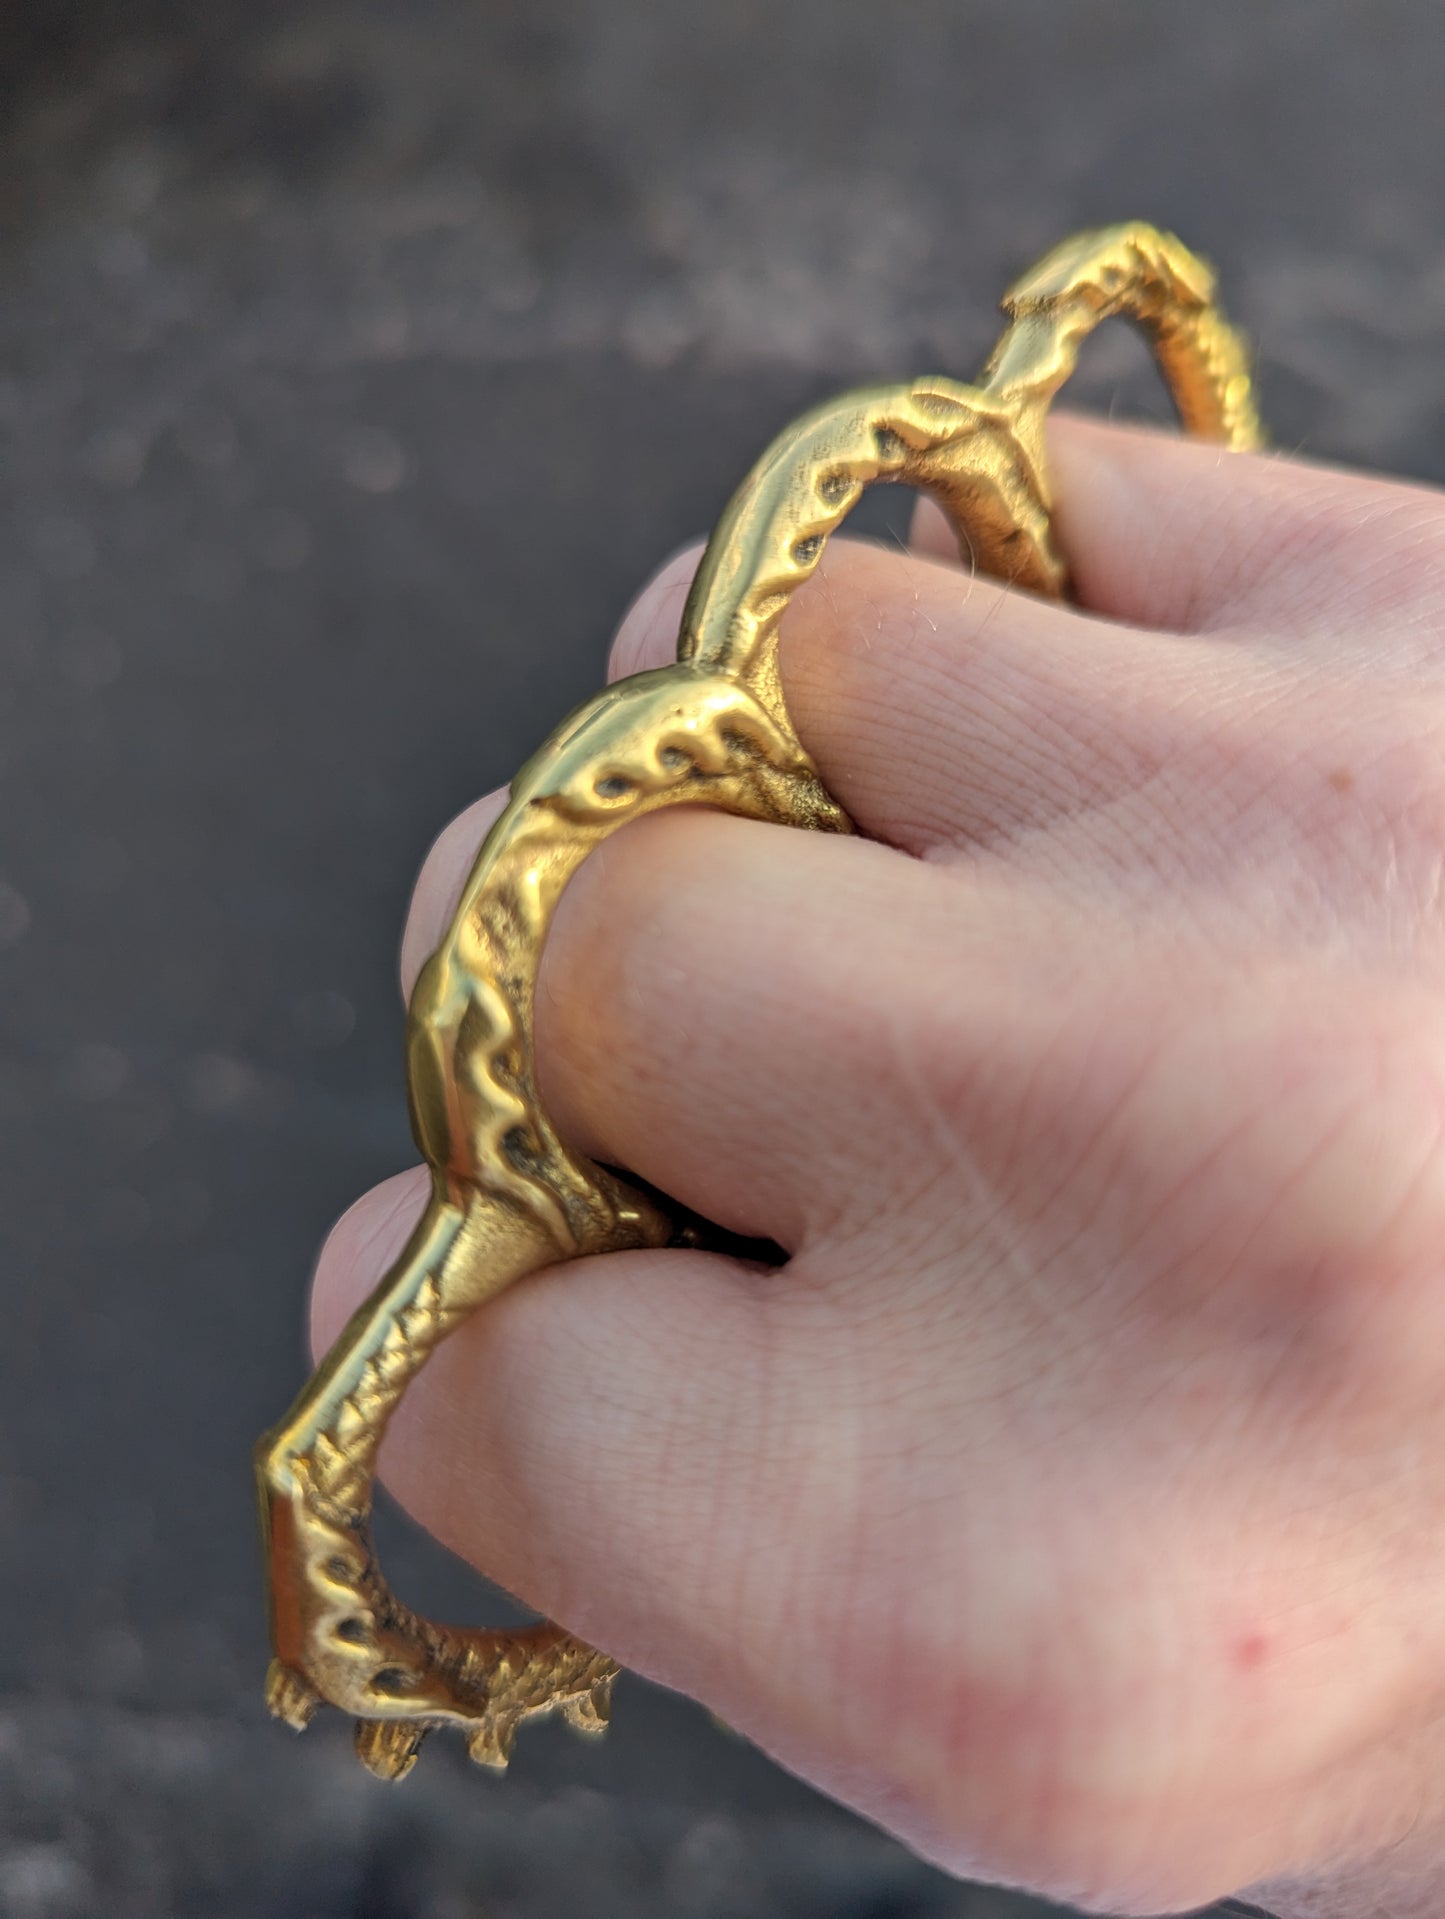 SOLID CAST BRASS DRAGON BRASS KNUCKLE DUSTER